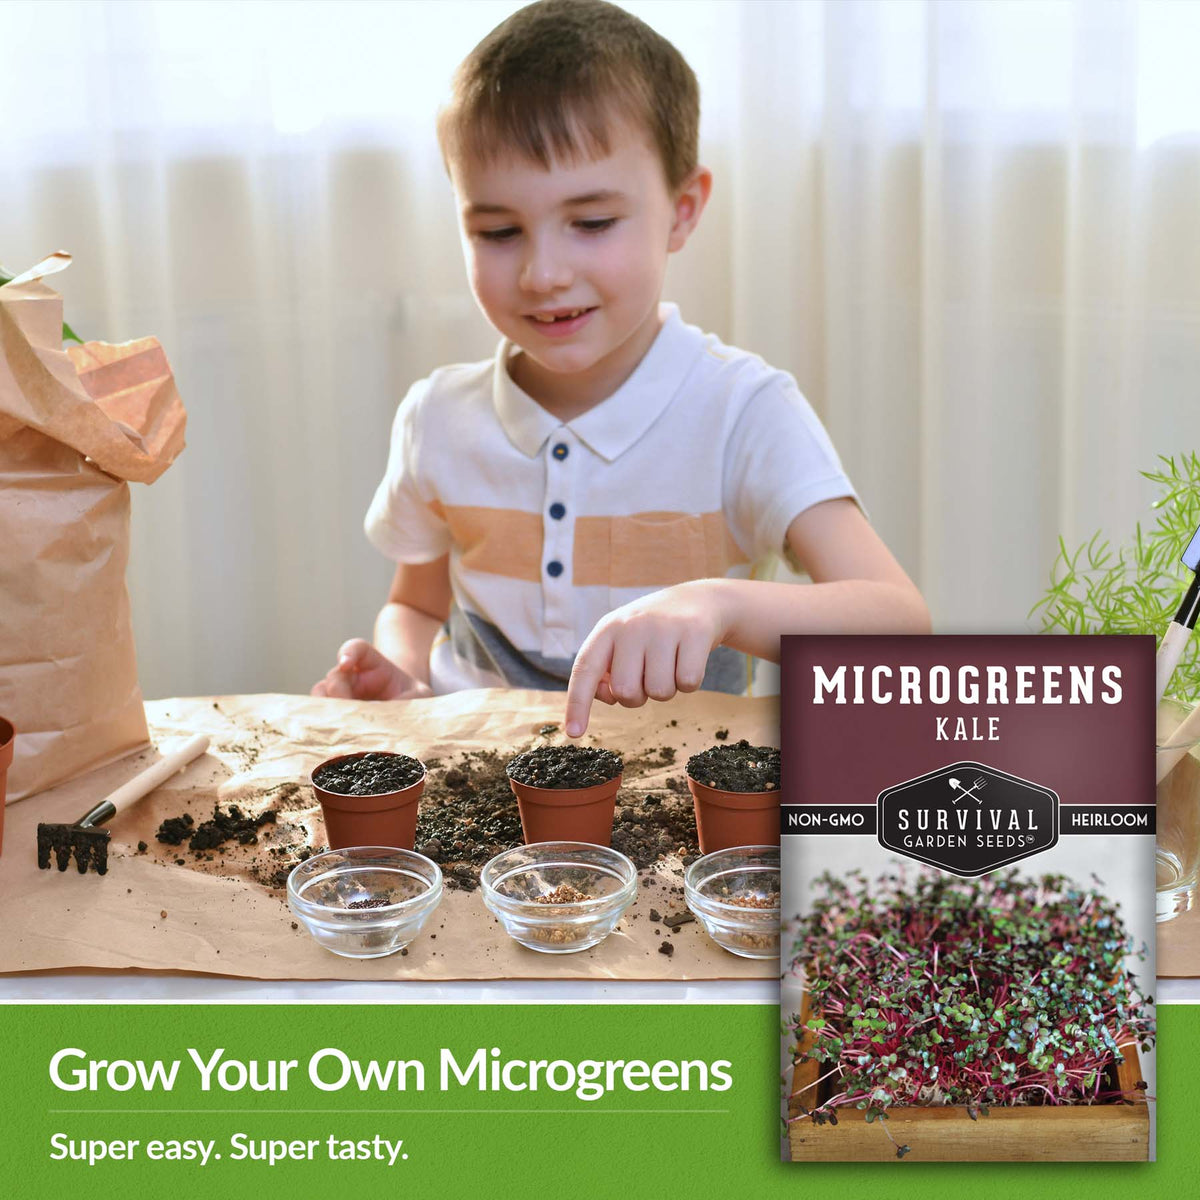 Grown your own microgreens